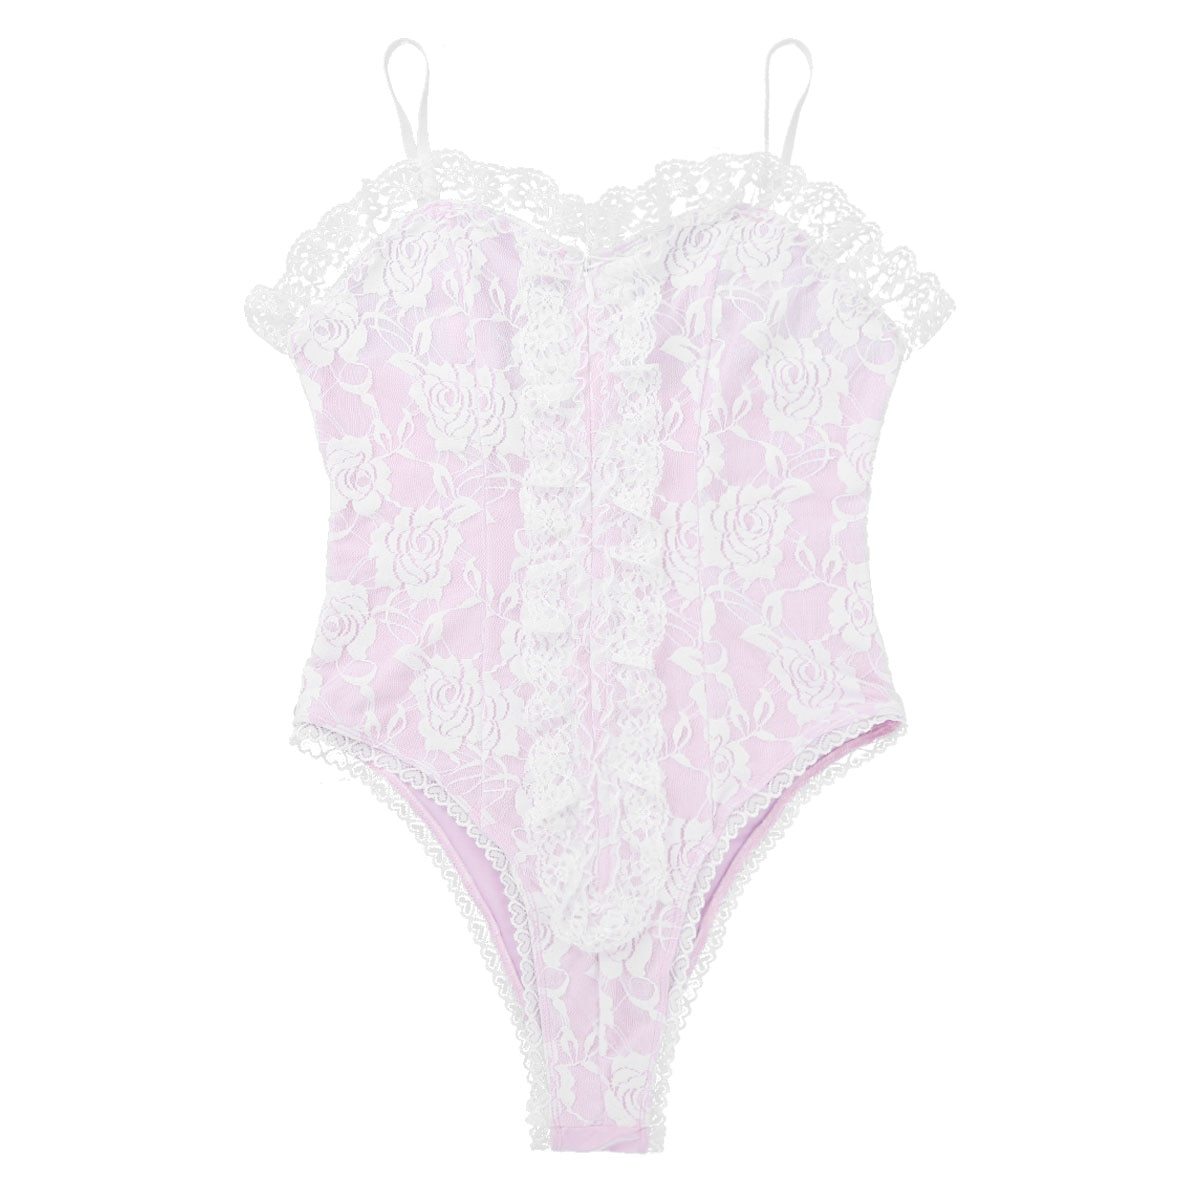 Mens Sissy Teddy Bodysuit with Floral Lace Pink & White